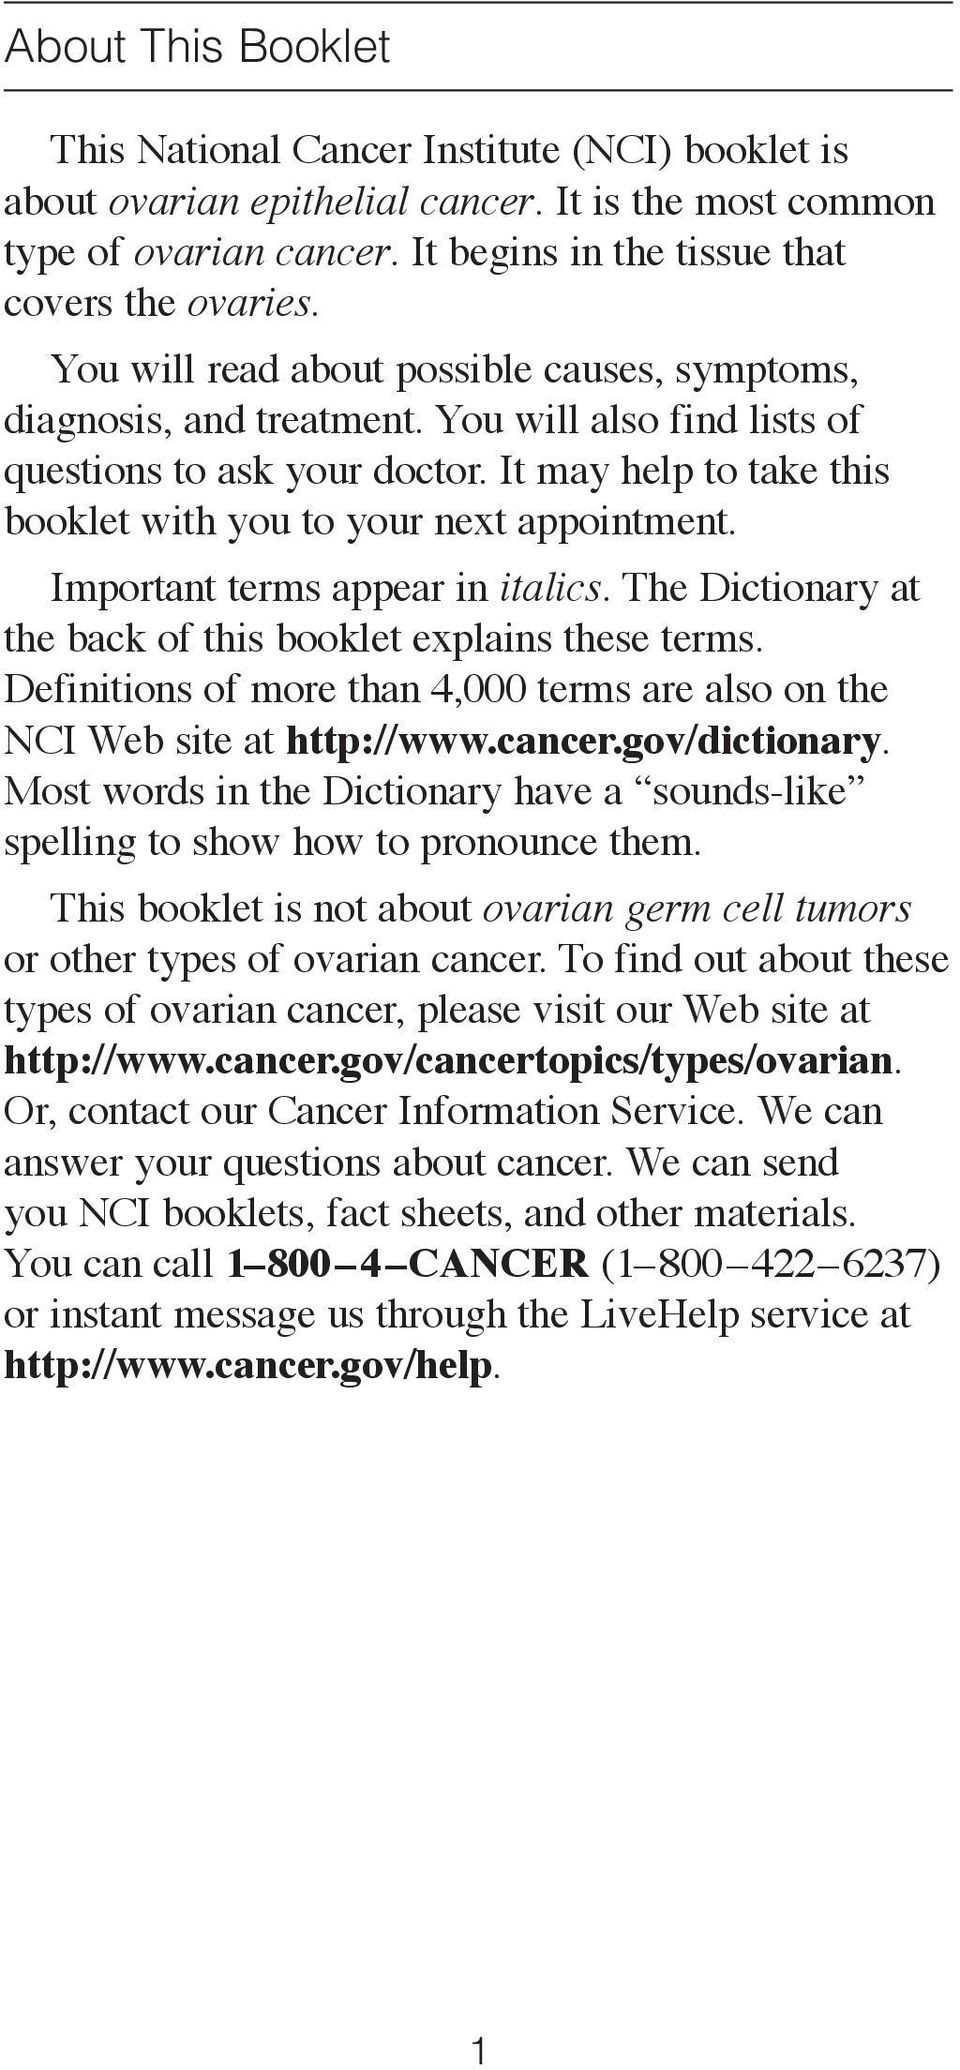 Important terms appear in italics. The Dictionary at the back of this booklet explains these terms. Definitions of more than 4,000 terms are also on the NCI Web site at http://www.cancer.